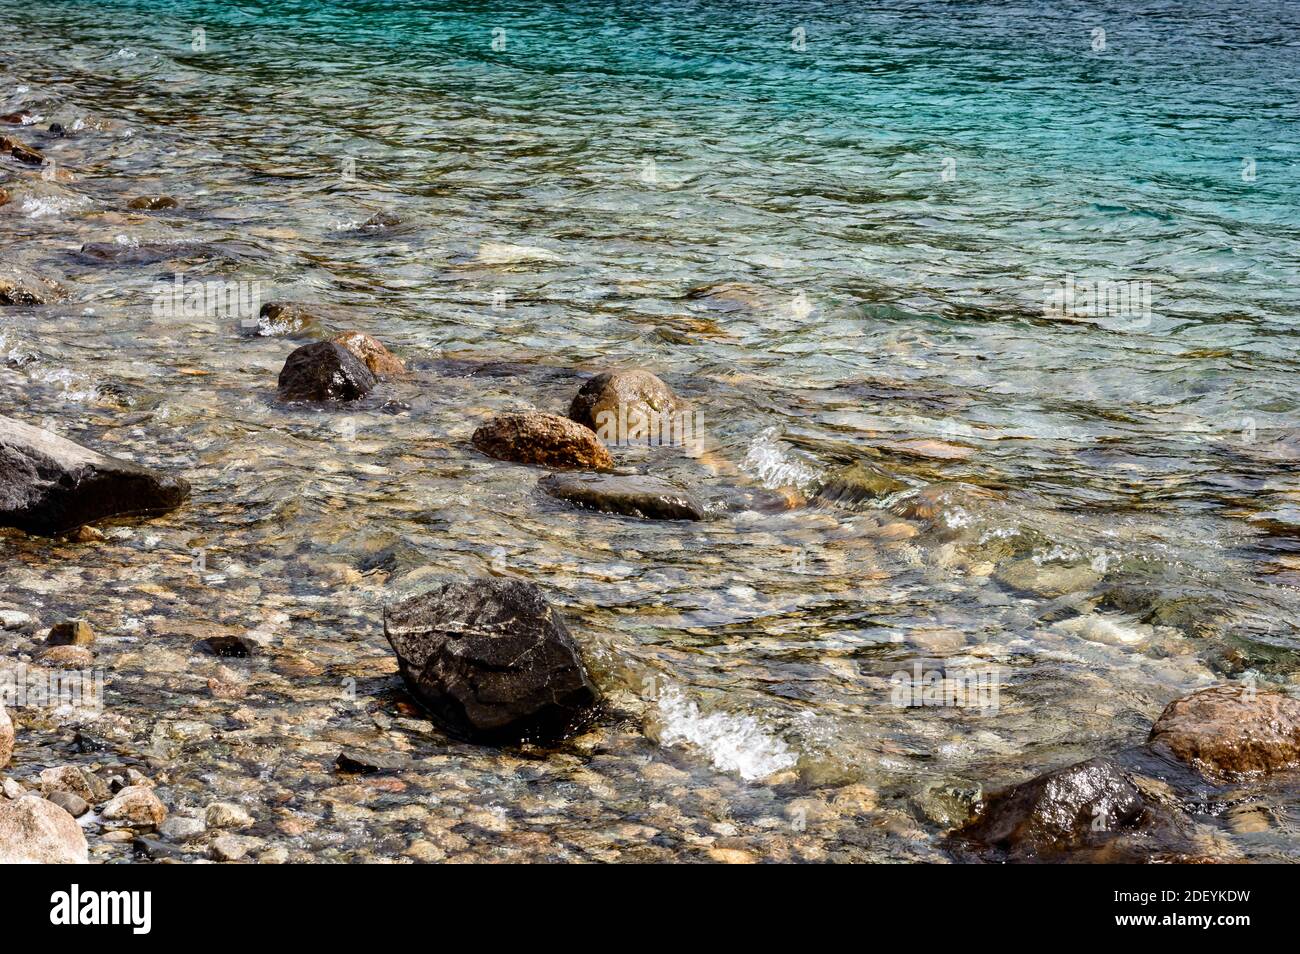 Beautiful lake of bariloche with rocks, pine trees, water, mountains Stock Photo